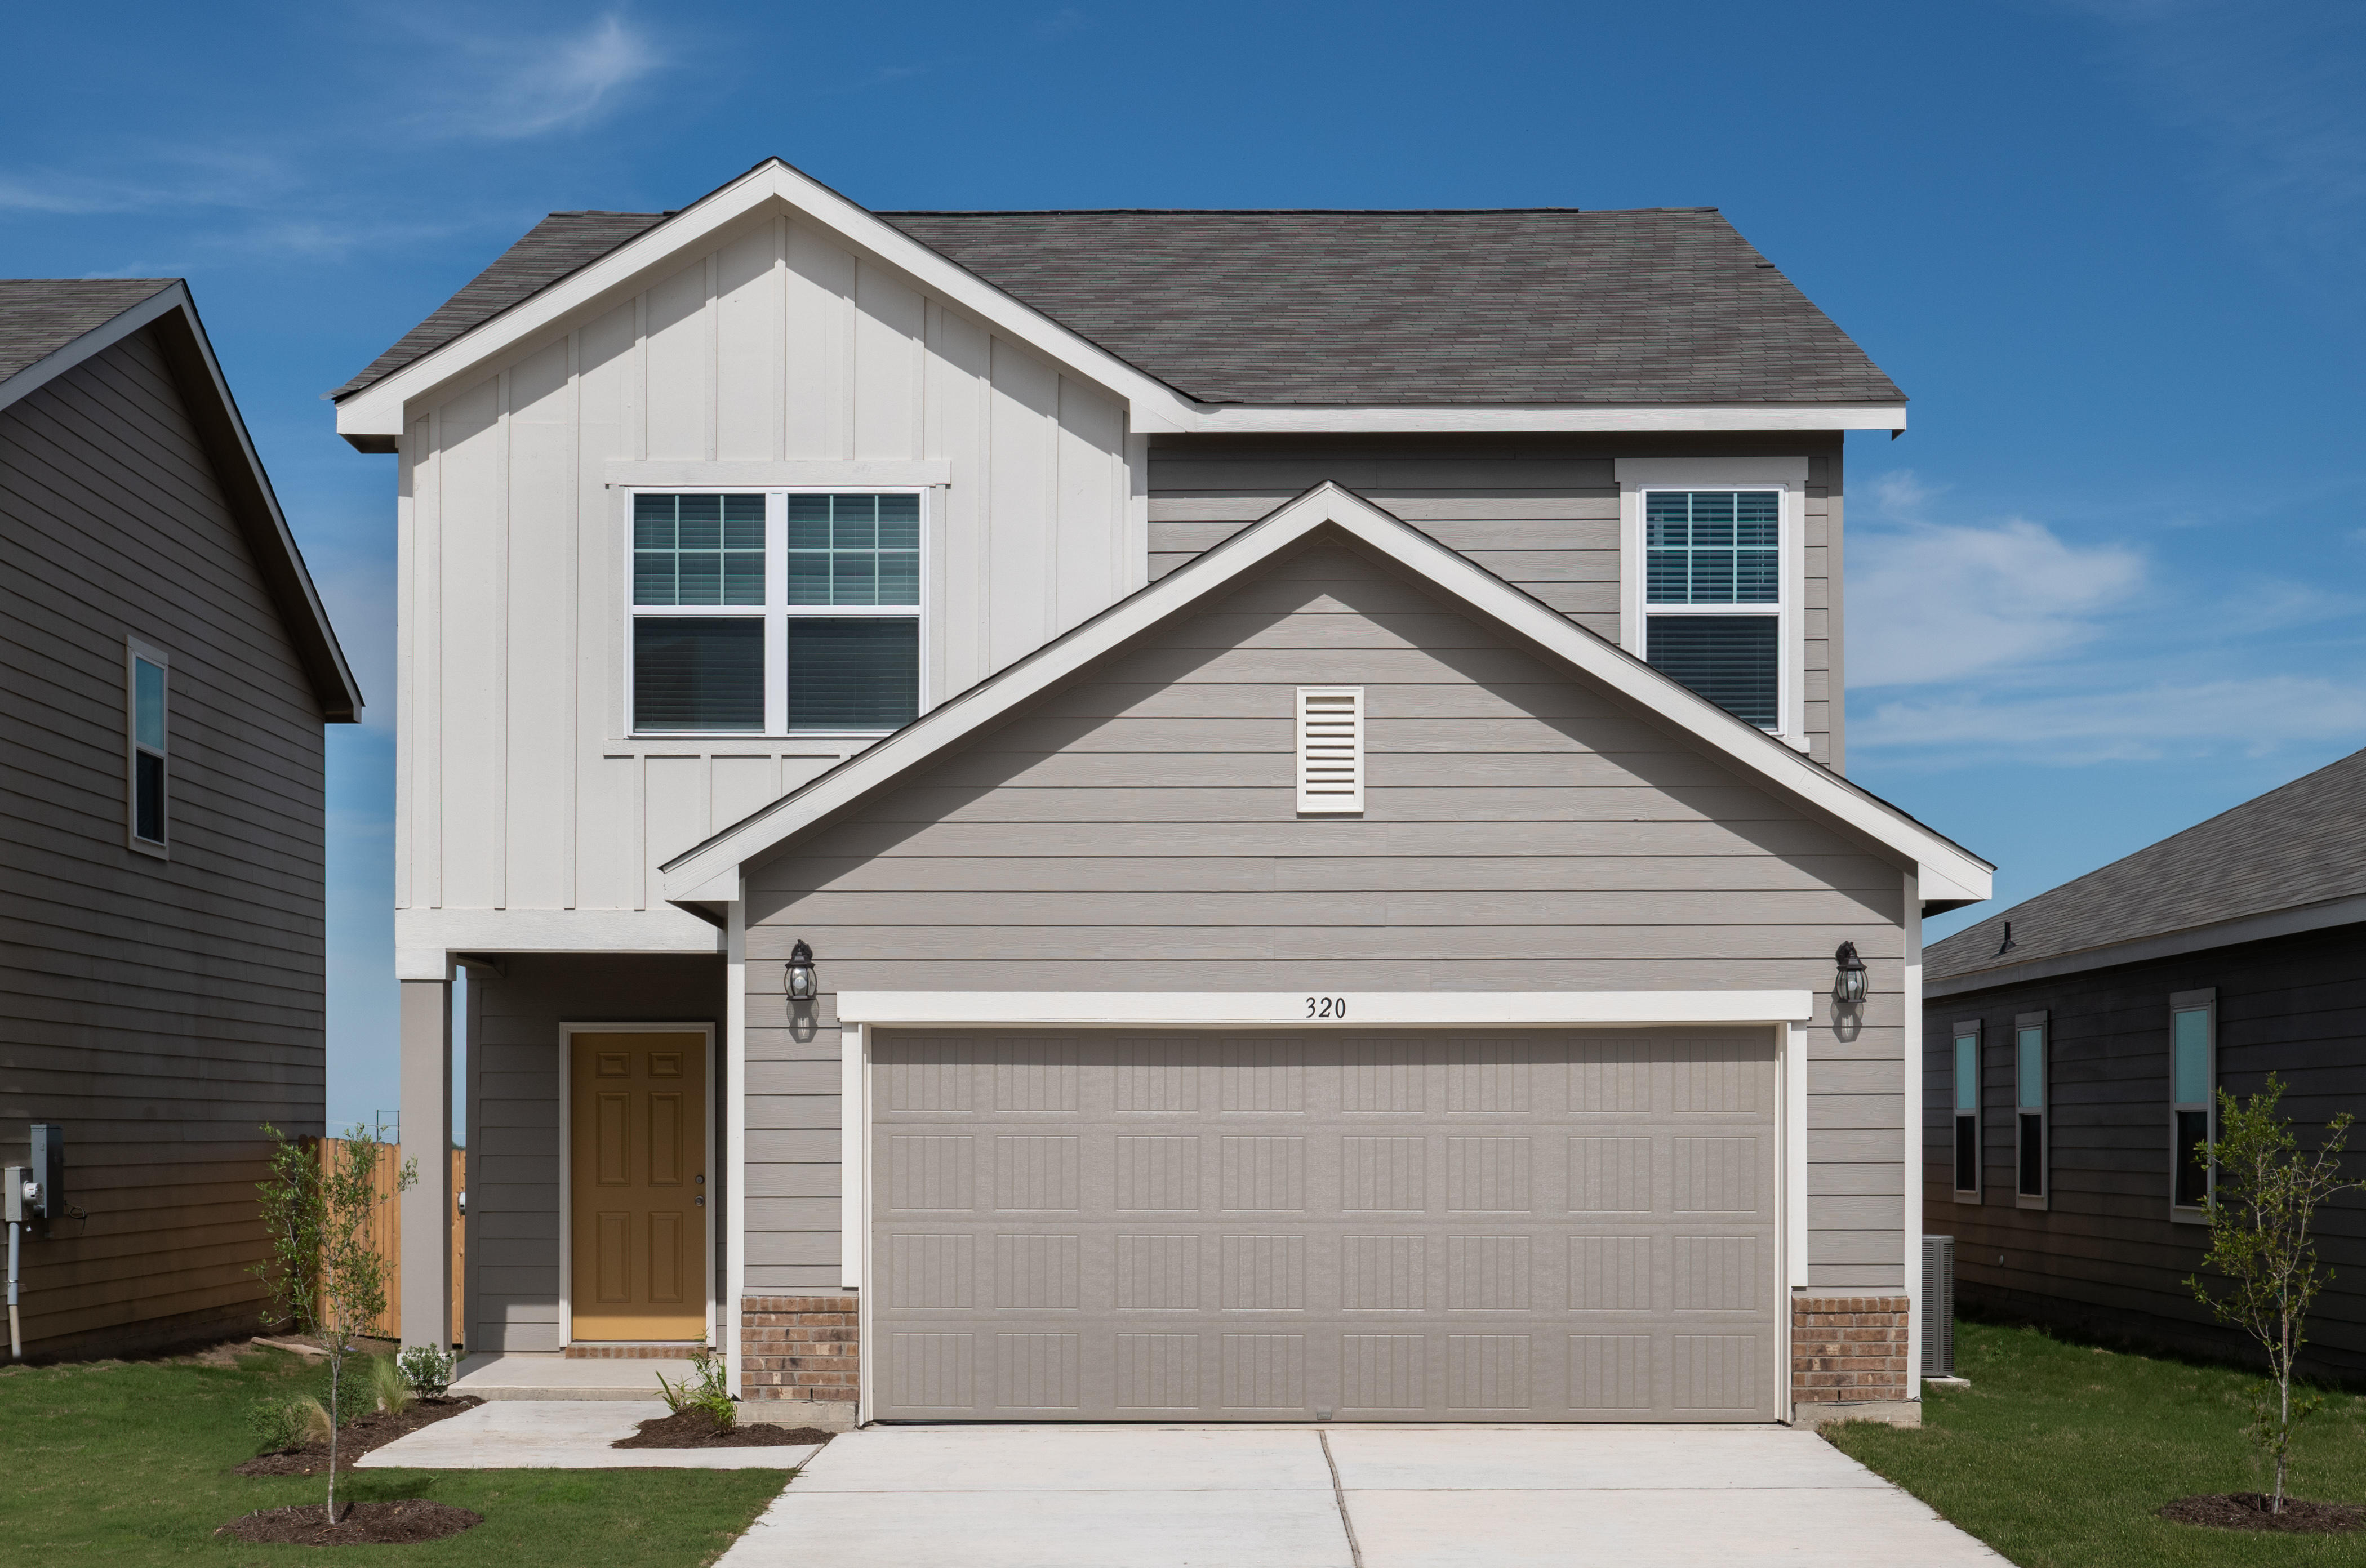 Check out our Magellan plan in our Angier neighborhood, Lynn Ridge!